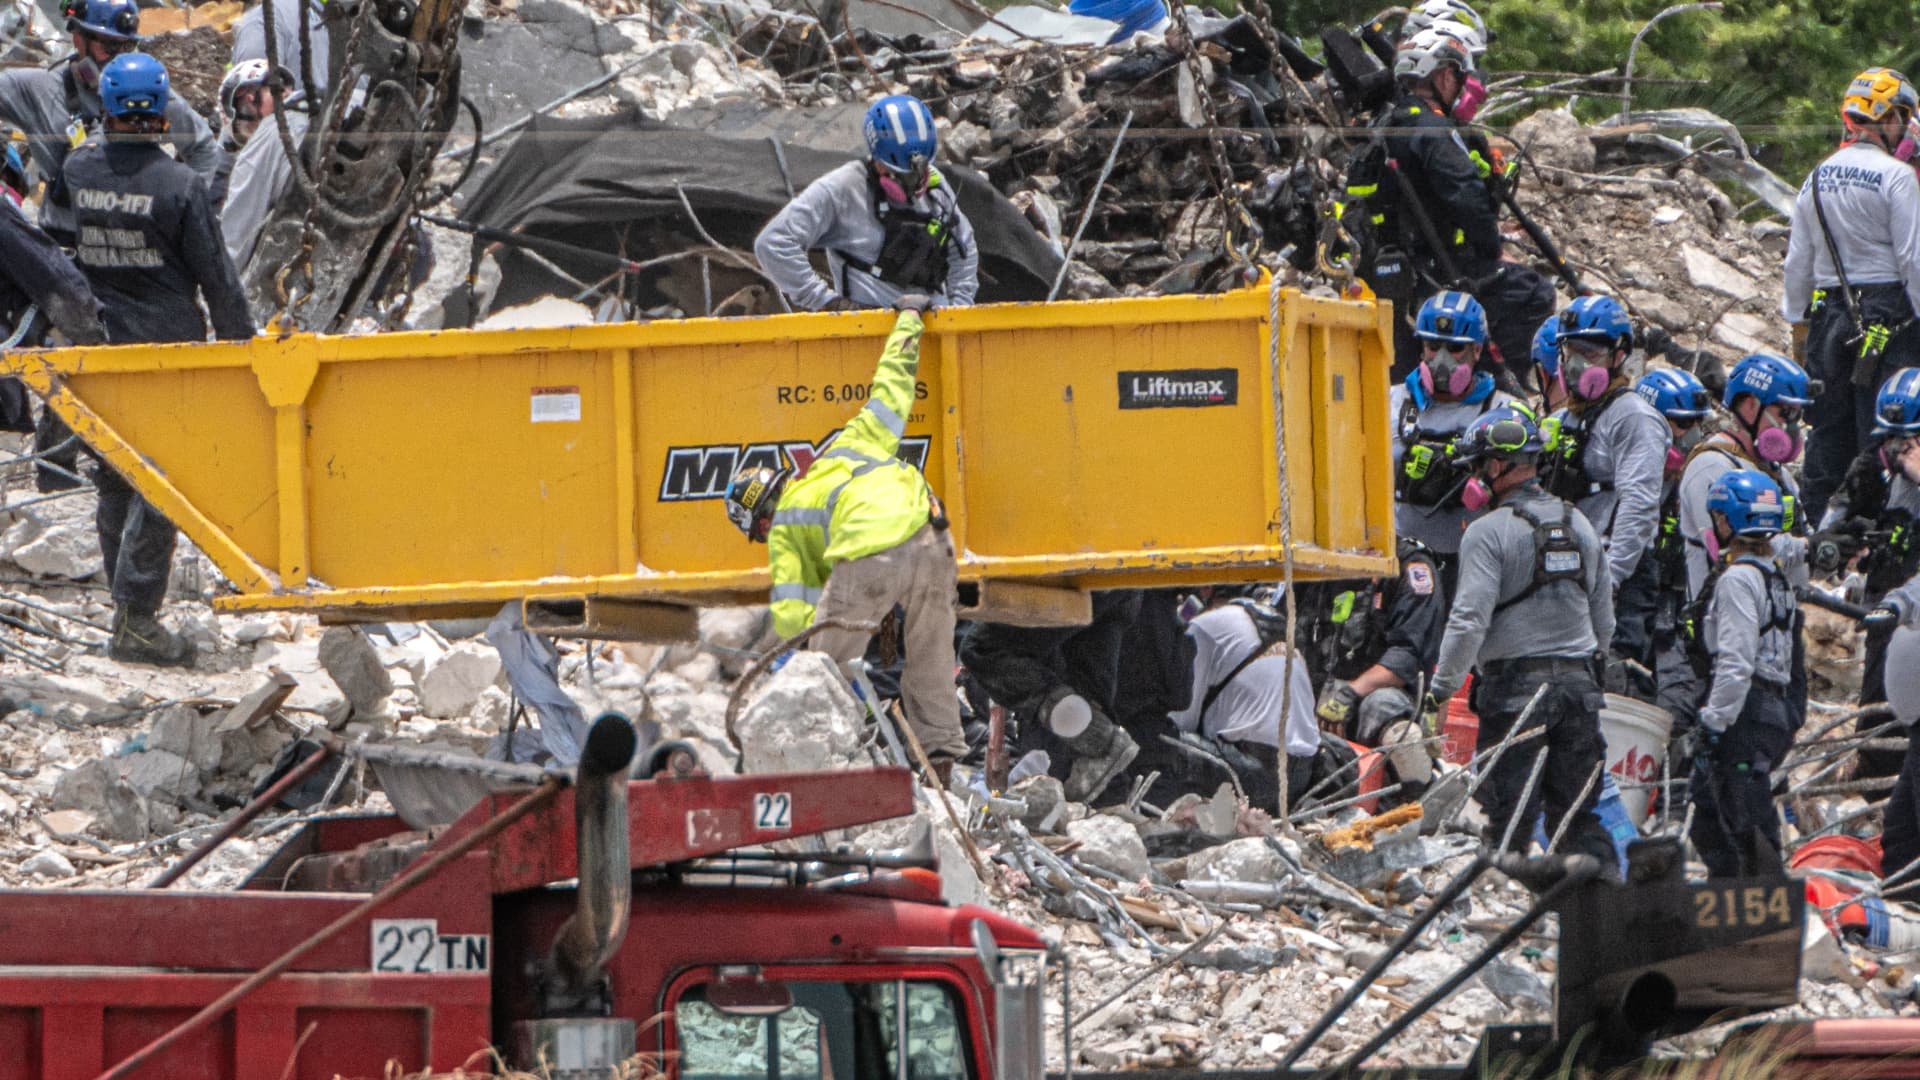 After a brief stop to demolish the standing debris, Search and Rescue personnel continue working in the rubble pile of the partially collapsed 12-story Champlain Towers South condo on July 5, 2021 in Surfside, Florida.